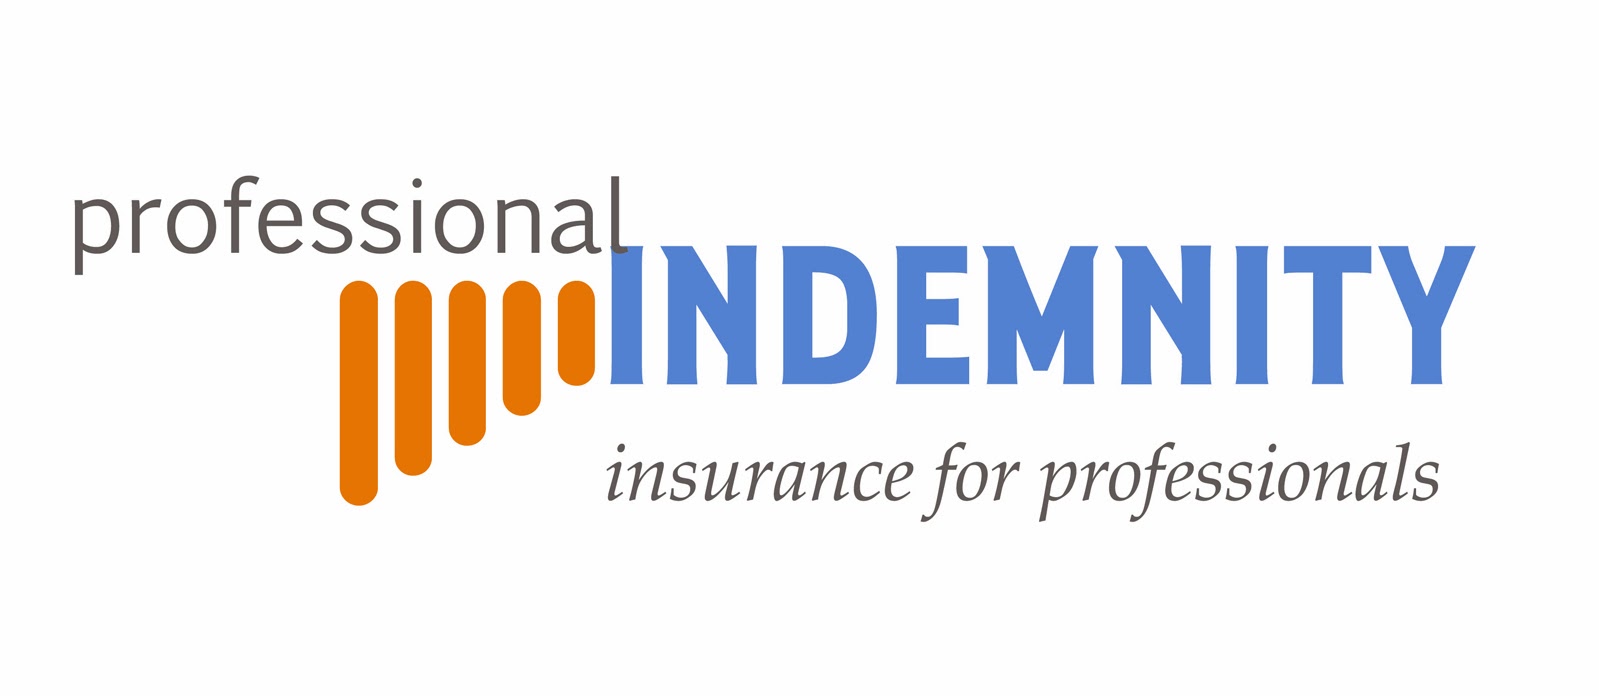 Indemnity Insurance Cheap Professional Indemnity Insurance